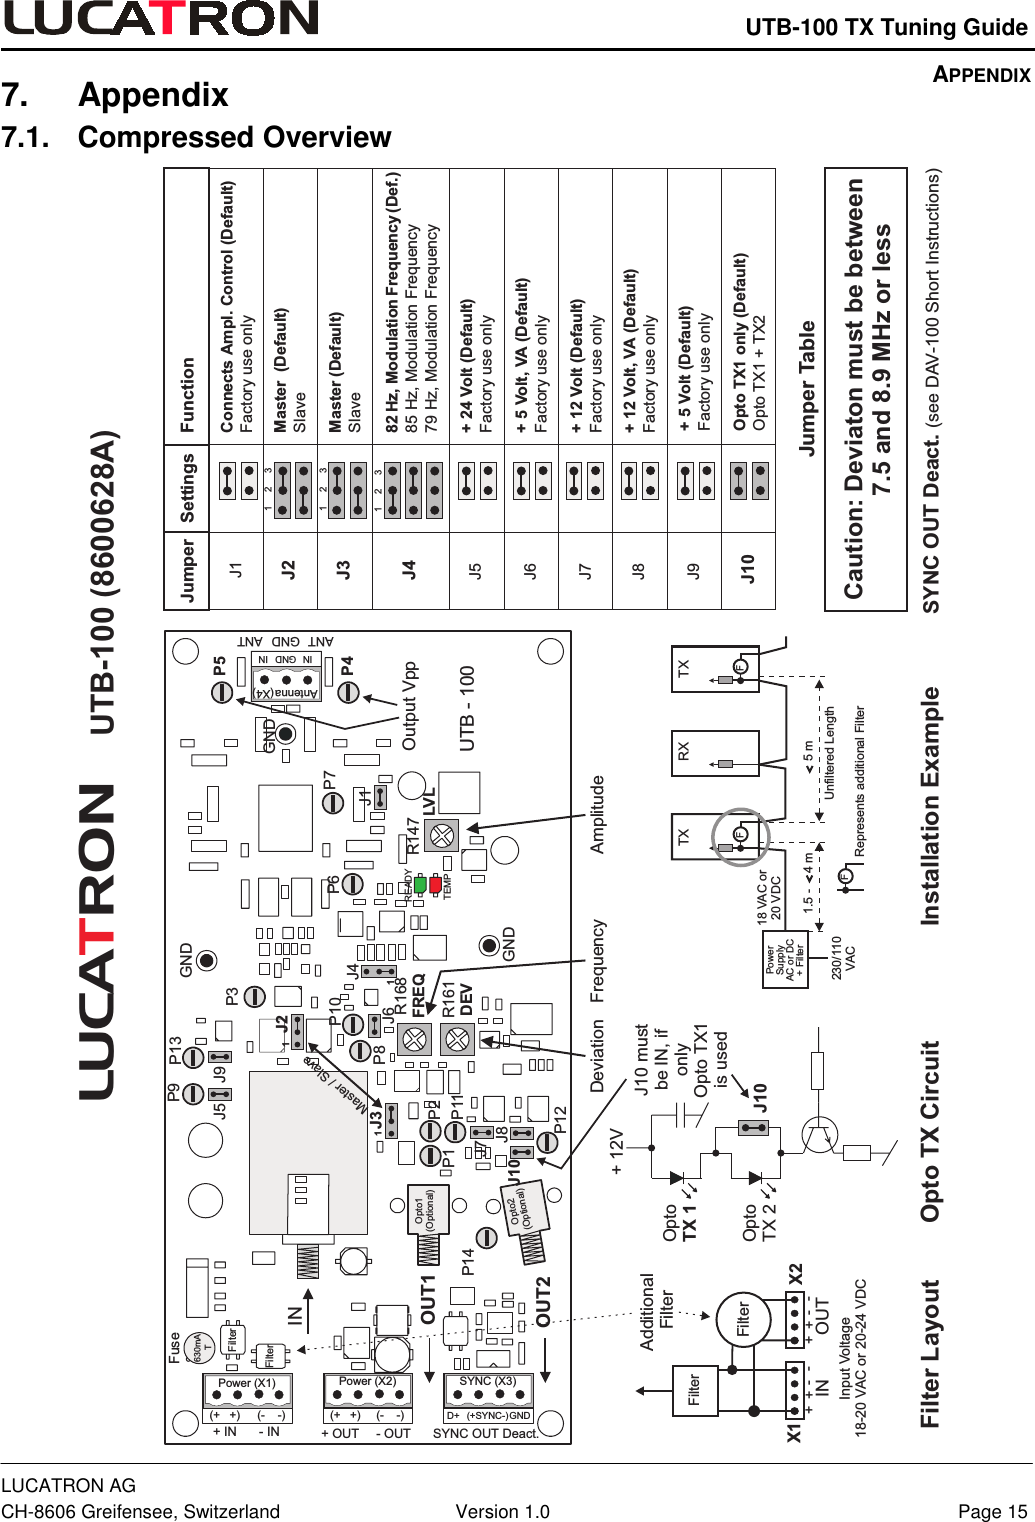    UTB-100 TX Tuning Guide LUCATRON AG CH-8606 Greifensee, Switzerland  Version 1.0  Page 15 7. Appendix 7.1. Compressed Overview AmplitudeOUT1OUT2P14P1 P2P11P9 P13P3P8P10P12GNDGNDP6 P7GNDP5P4R168FREQR161DEVR147LVLJ1J4J6J2J5 J9J10 J8J3Power (X1)(+ +) (- -)Power (X2)(+ +) (- -)SYNC (X3)D+ GNDIN GND INAntenna(X4)IN+IN -IN + OUT - OUT(+SYNC-)SYNC OUT Deact.J7Opto1(Optional)Opto2(Optional)1Master / Slave1ANTANT GNDTEMPREADYDeviation FrequencyUTB - 100FilterFilterOUTAdditionalFilterX1++--INX2++--Input Voltage18-20 VAC or 20-24 VDCRXPowerSupplyAC or DC+ Filter1.5 4m 5mTXFTXF-Unfiltered Length230/110VAC18 VAC or20 VDCFRepresents additional FilterOptoTX 2OptoTX 1J10+ 12VFuseFilterFilter630mAJ10 mustbe IN, ifonlyOpto TX1is usedFilter Layout Installation ExampleOpto TX CircuitLUCA RONTOutput VppJumper TableUTB-100 (8600628A)1Jumper Settings FunctionJ1J2J3Connects Ampl. Control (Default)Factory use onlyMaster (Default)SlaveMaster (Default)Slave12382 Hz, Modulation Frequency (Def.)85 Hz, Modulation Frequency79 Hz, Modulation FrequencyJ4J5J6J7J8J9+ 24 Volt (Default)Factory use only+ 5 Volt, VA (Default)Factory use only+ 12 Volt (Default)Factory use onlyOpto TX1 only (Default)Opto TX1 + TX2+ 5 Volt (Default)Factory use only+ 12 Volt, VA (Default)Factory use onlyJ10123123SYNC OUT Deact.(see DAV-100 Short Instructions)TCaution: Deviaton must be between7.5 and 8.9 MHz or less APPENDIX